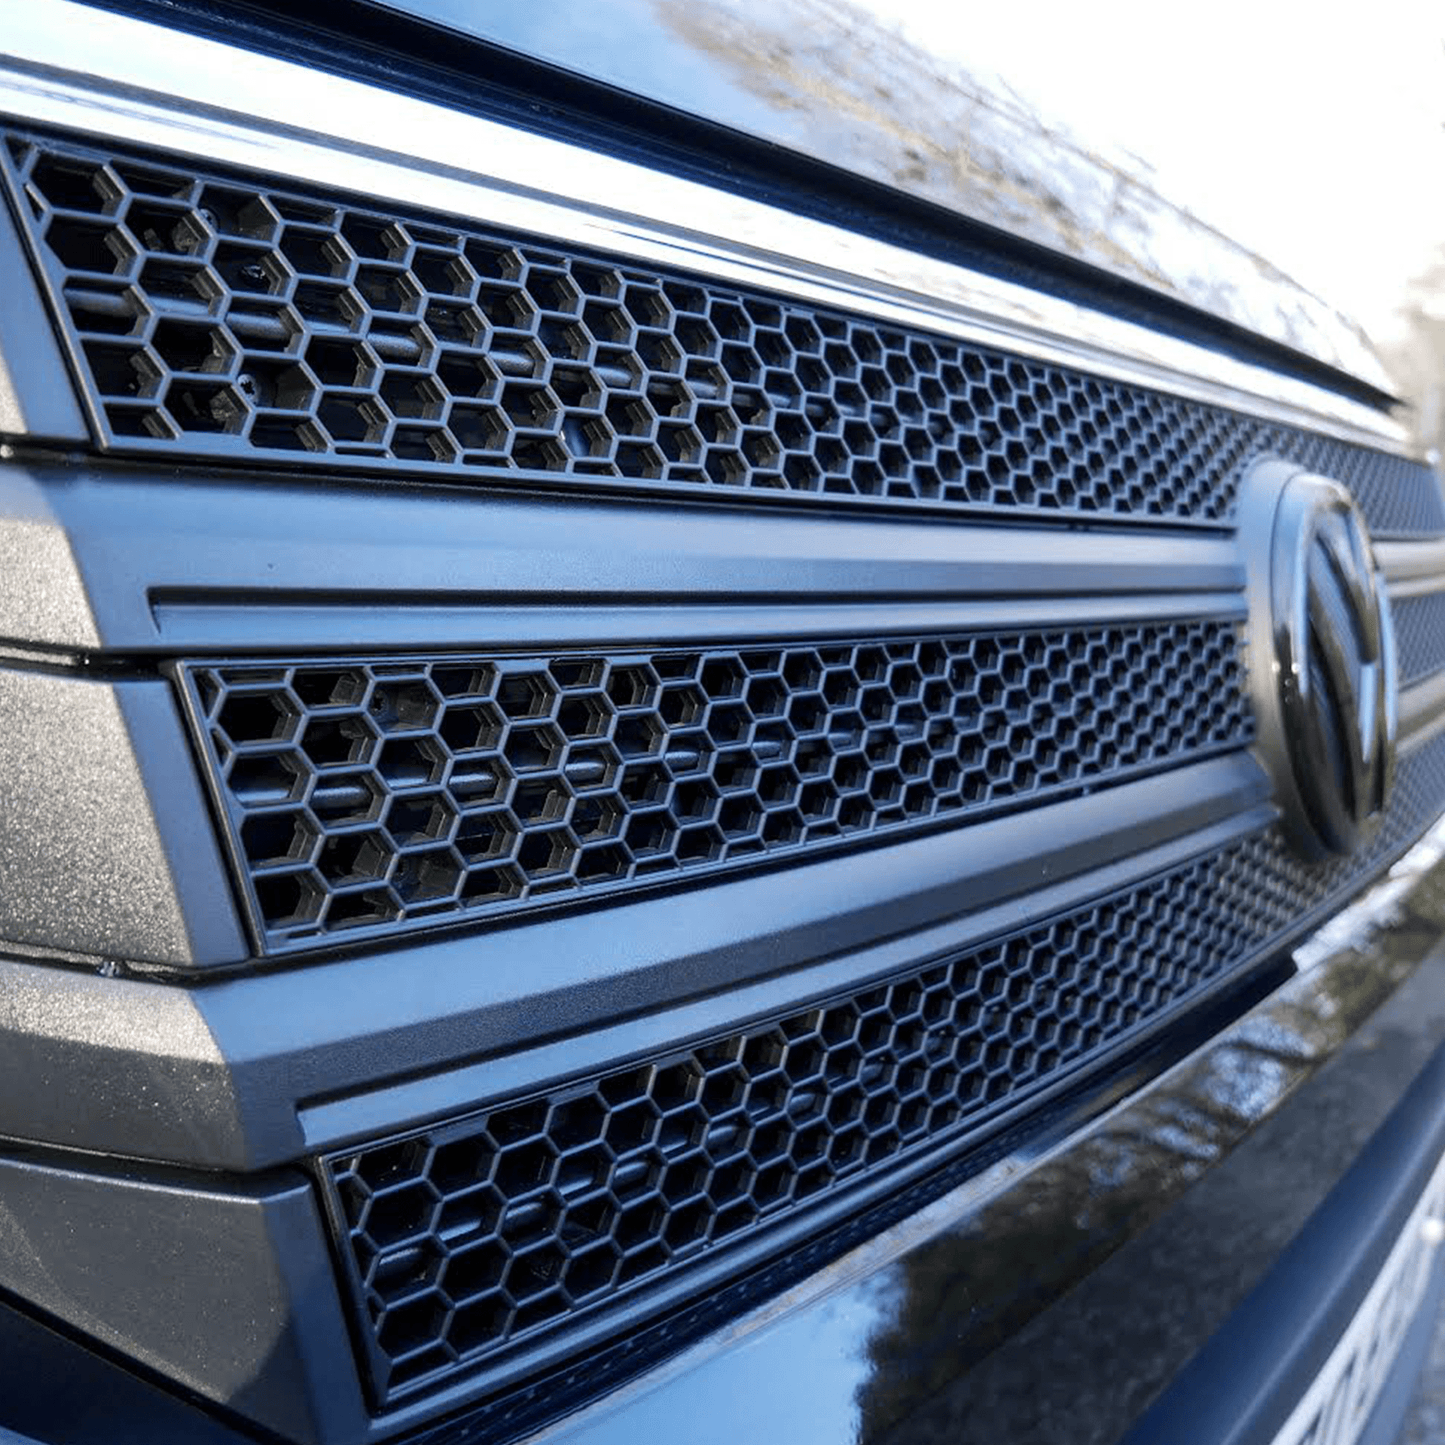 For VW Crafter New Shape Honeycomb Grille Inserts